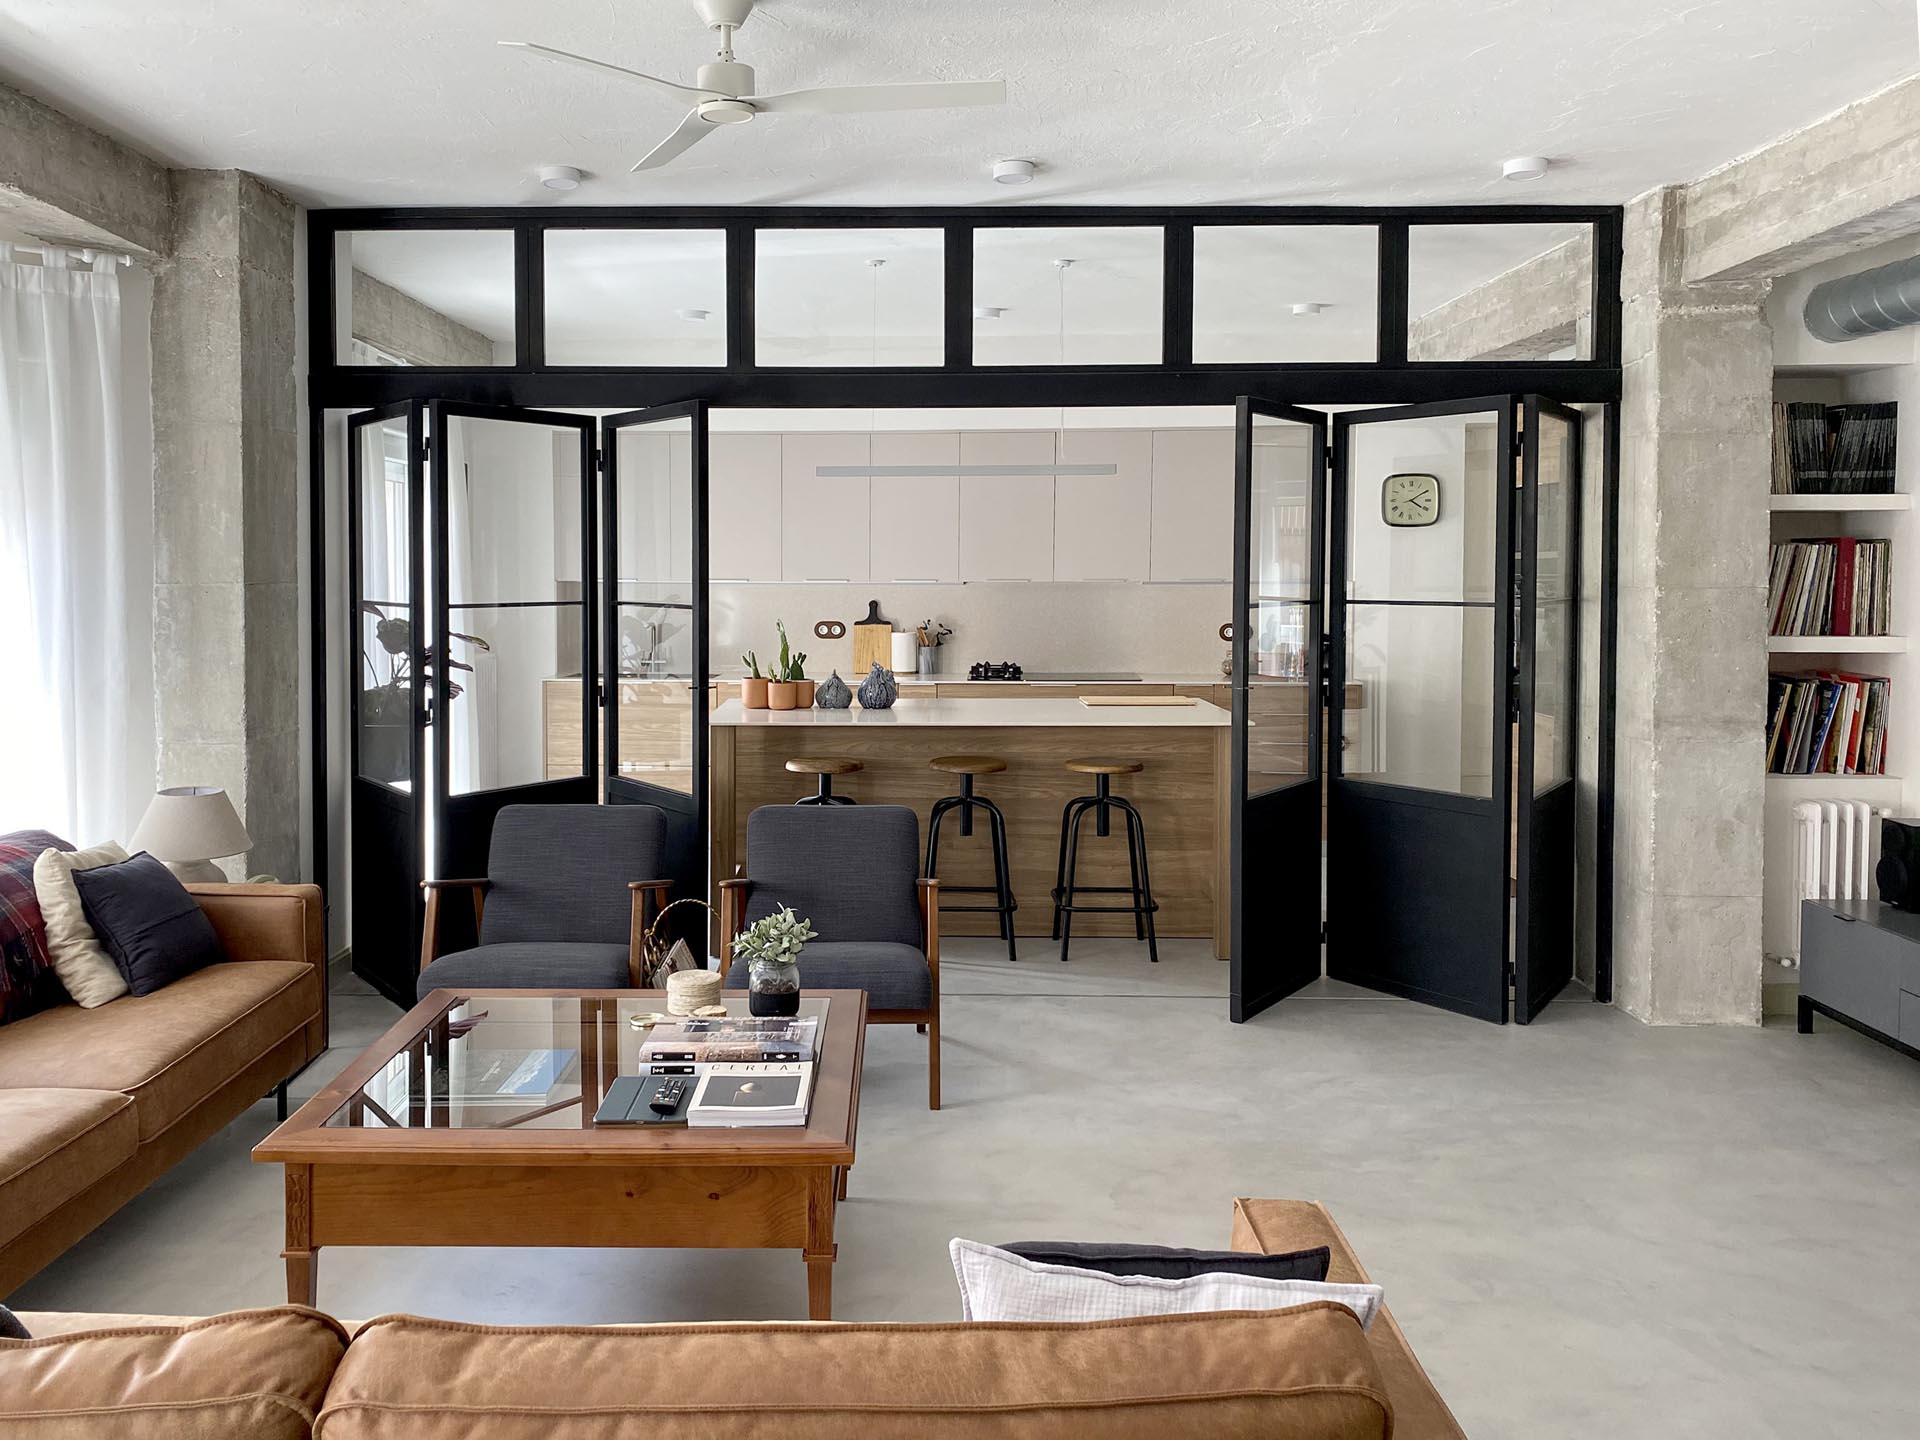 A modern kitchen can be closed off from the living room by black-framed doors with windows.